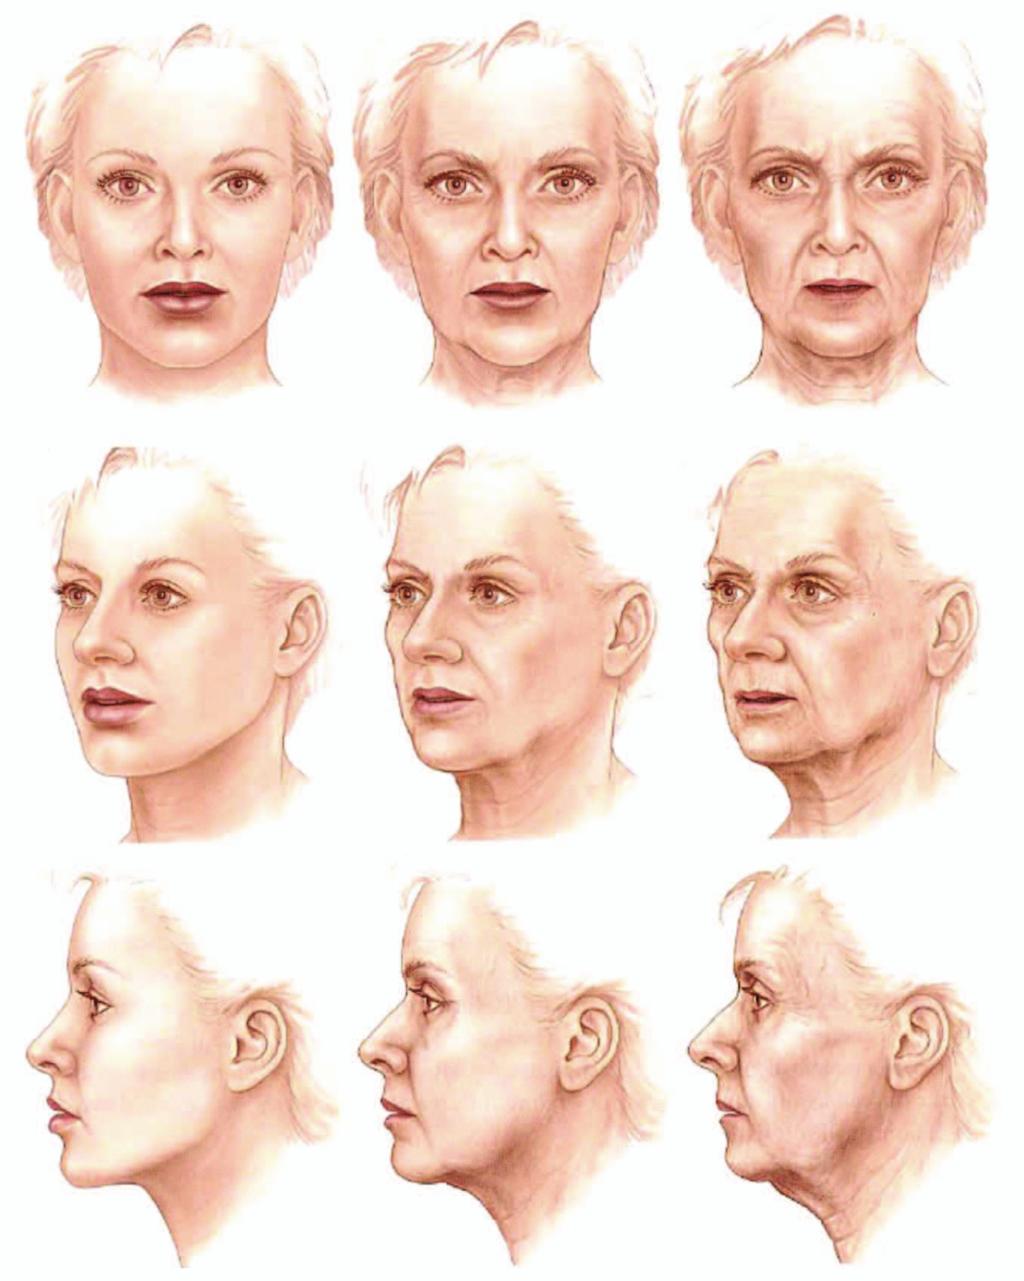 Figure 2. Aging of the female face, as represented by models representing an individual at ~20 years of age (left), ~50 years (center), and ~75 years (right).